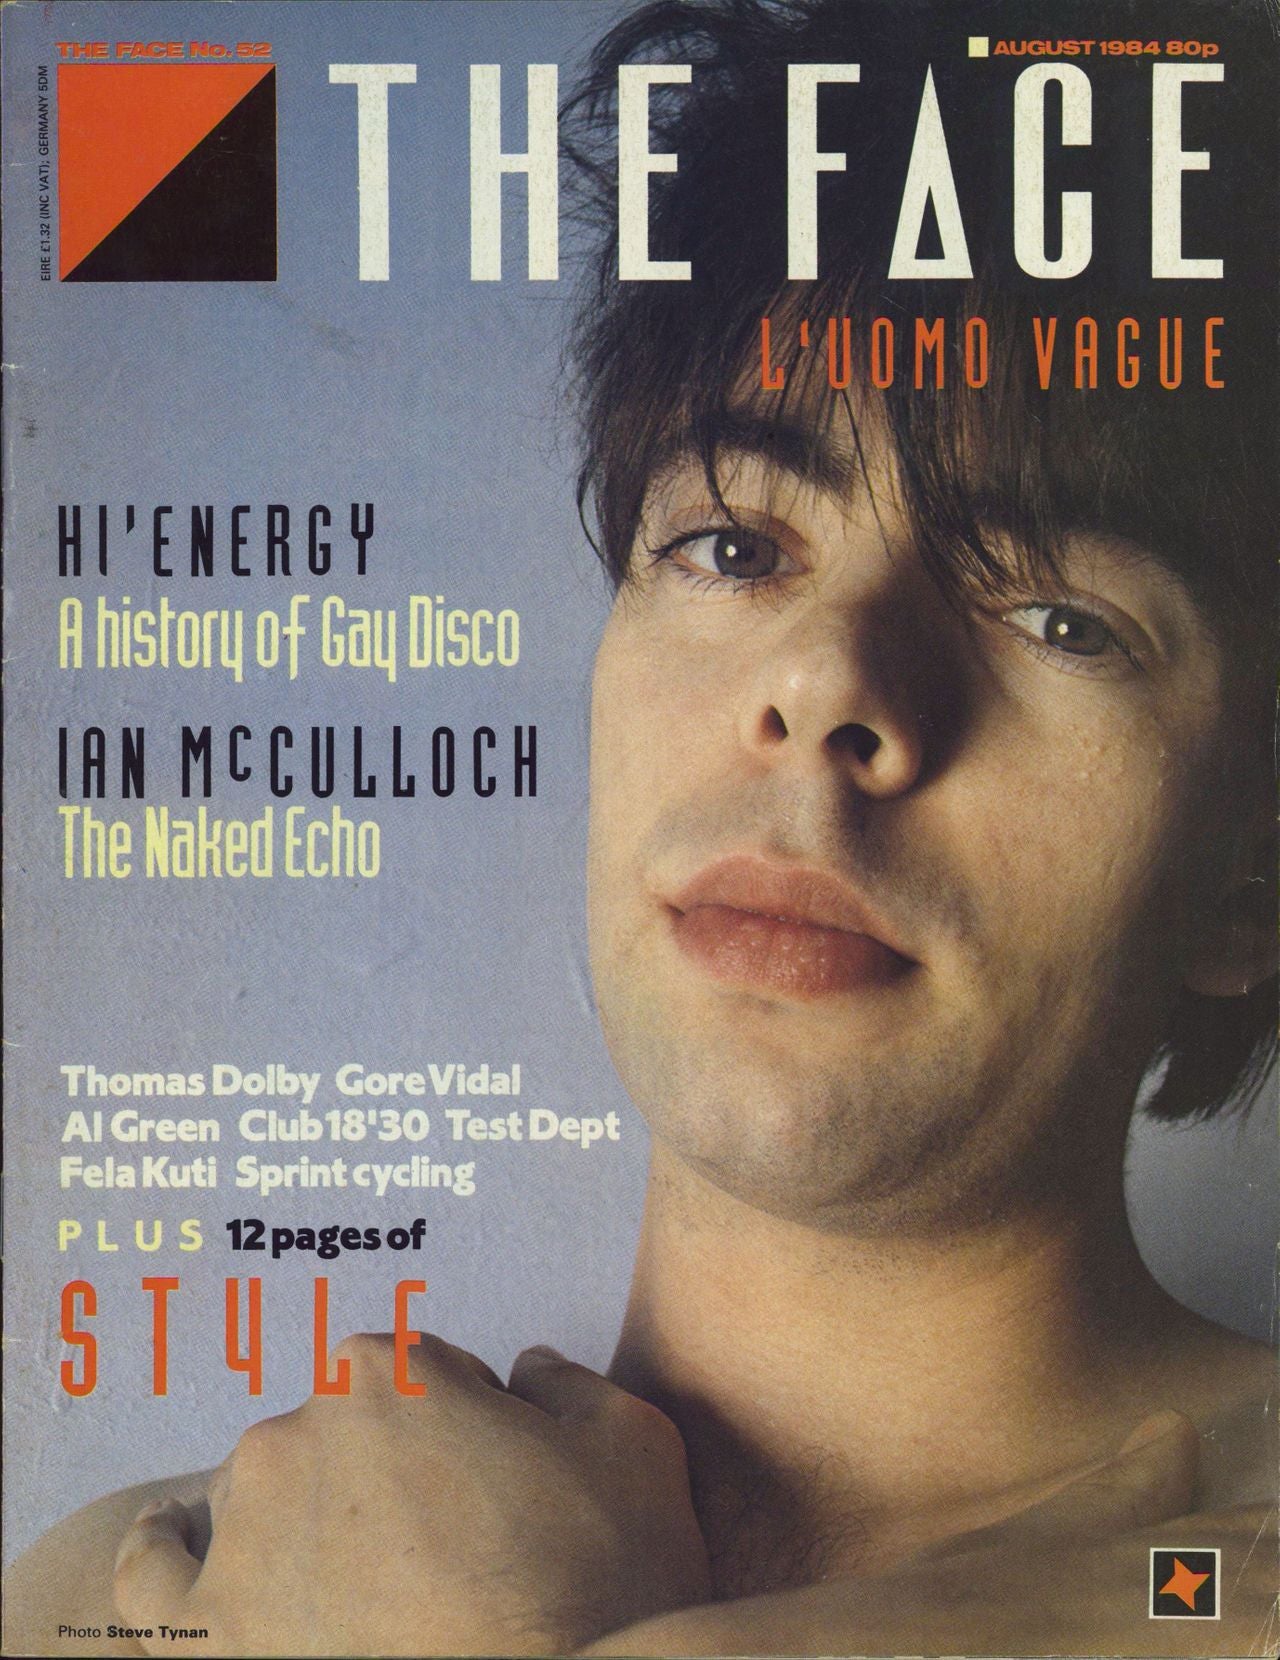 Ian McCulloch The Face - August 1984 UK magazine AUGUST 1984